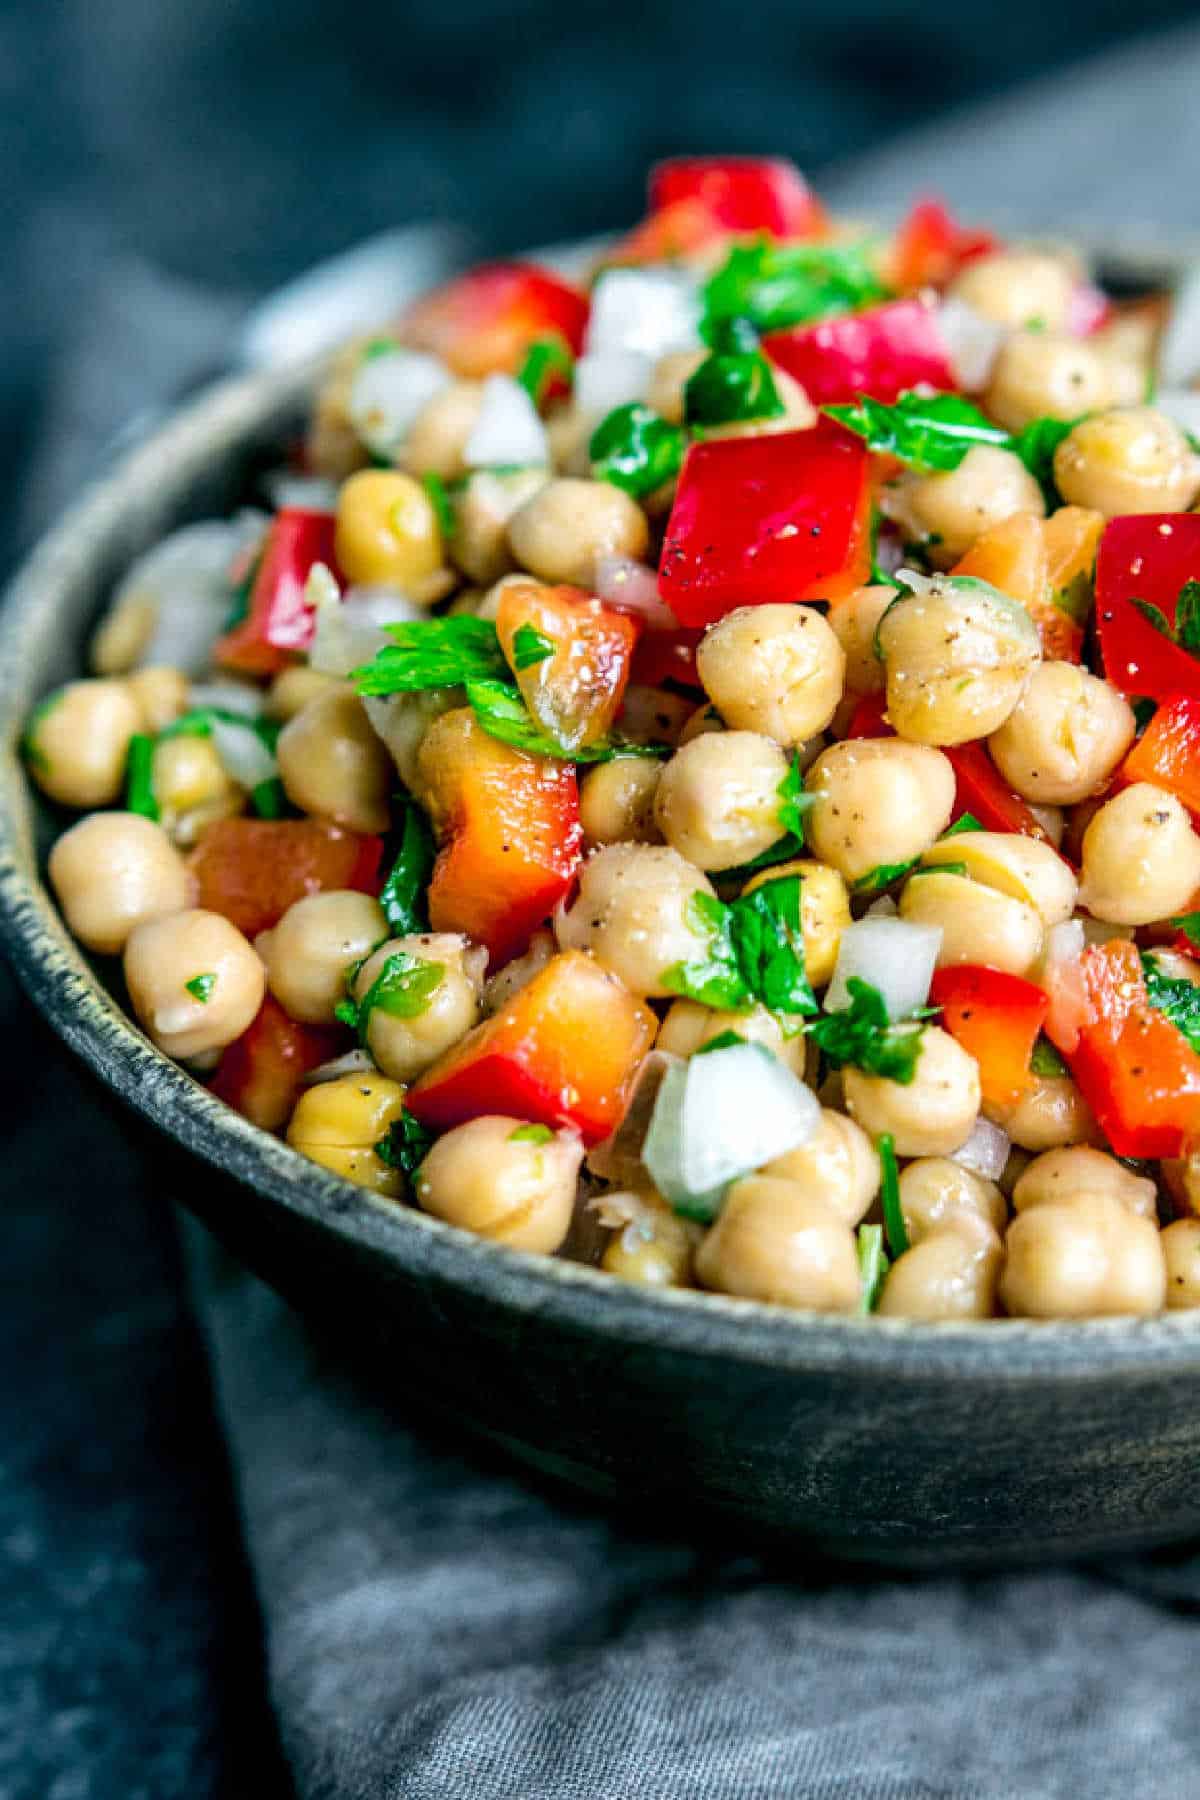 Mediterranean Chickpea Salad made with red bell peppers and onions